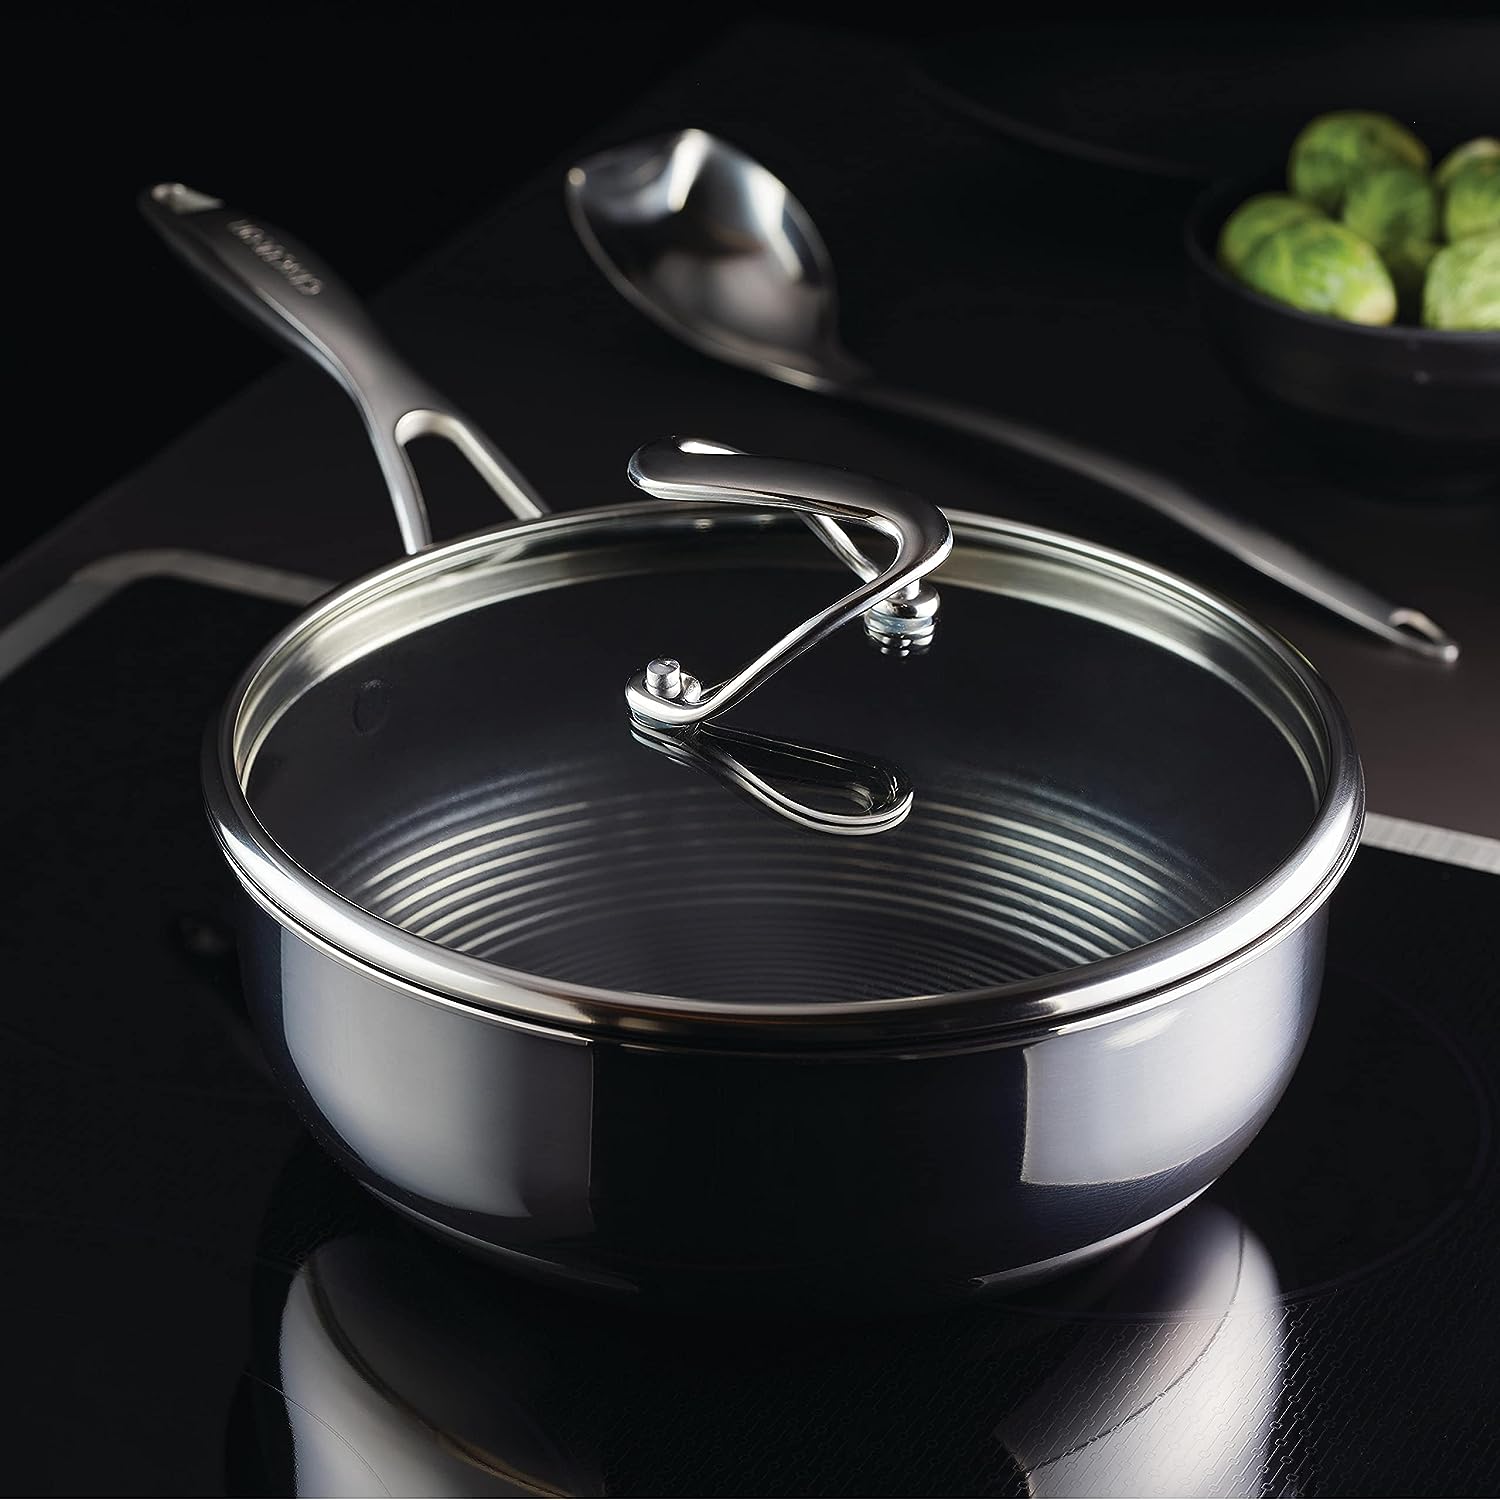 https://bigbigmart.com/wp-content/uploads/2023/09/Circulon-Clad-Stainless-Steel-Chef-Pan-and-Utensil-Set-with-Hybrid-SteelShield-and-Nonstick-Technology9.jpg